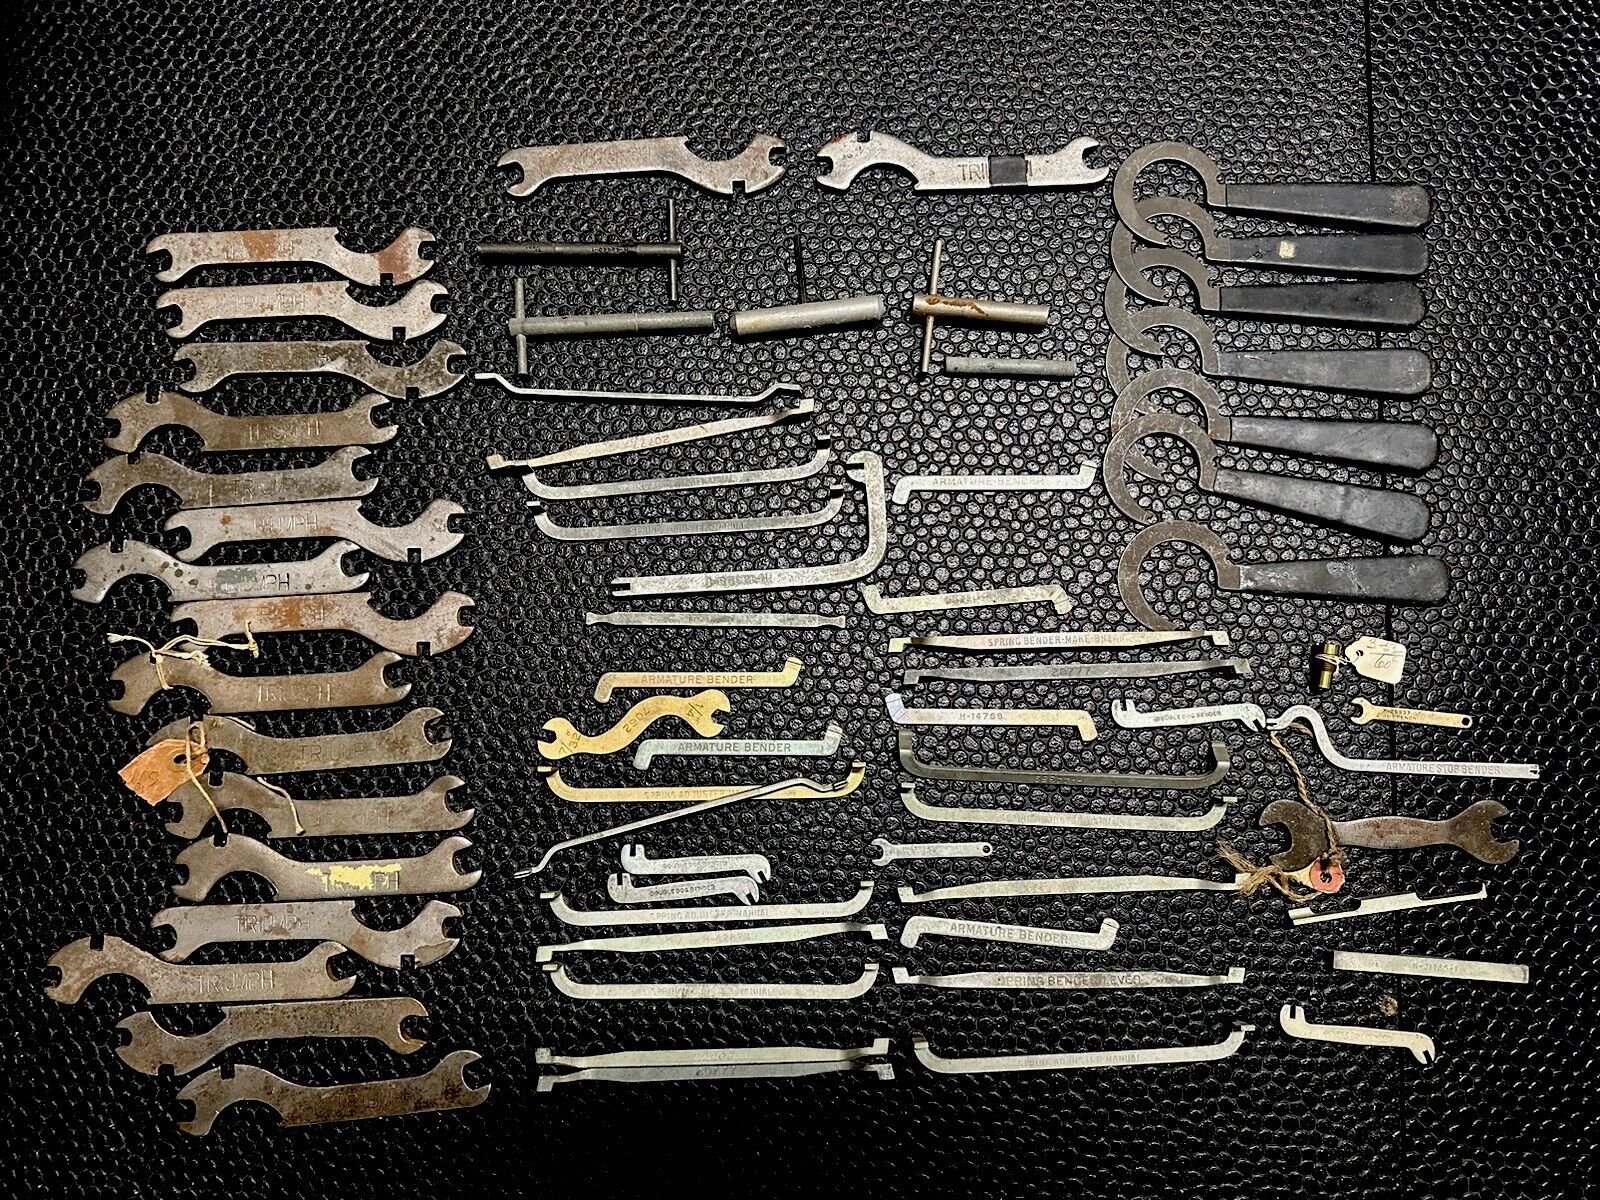 TRIUMPH TRW MILITARY CANADA Antique Wrench Motorcycle Tool Lot  65 PC